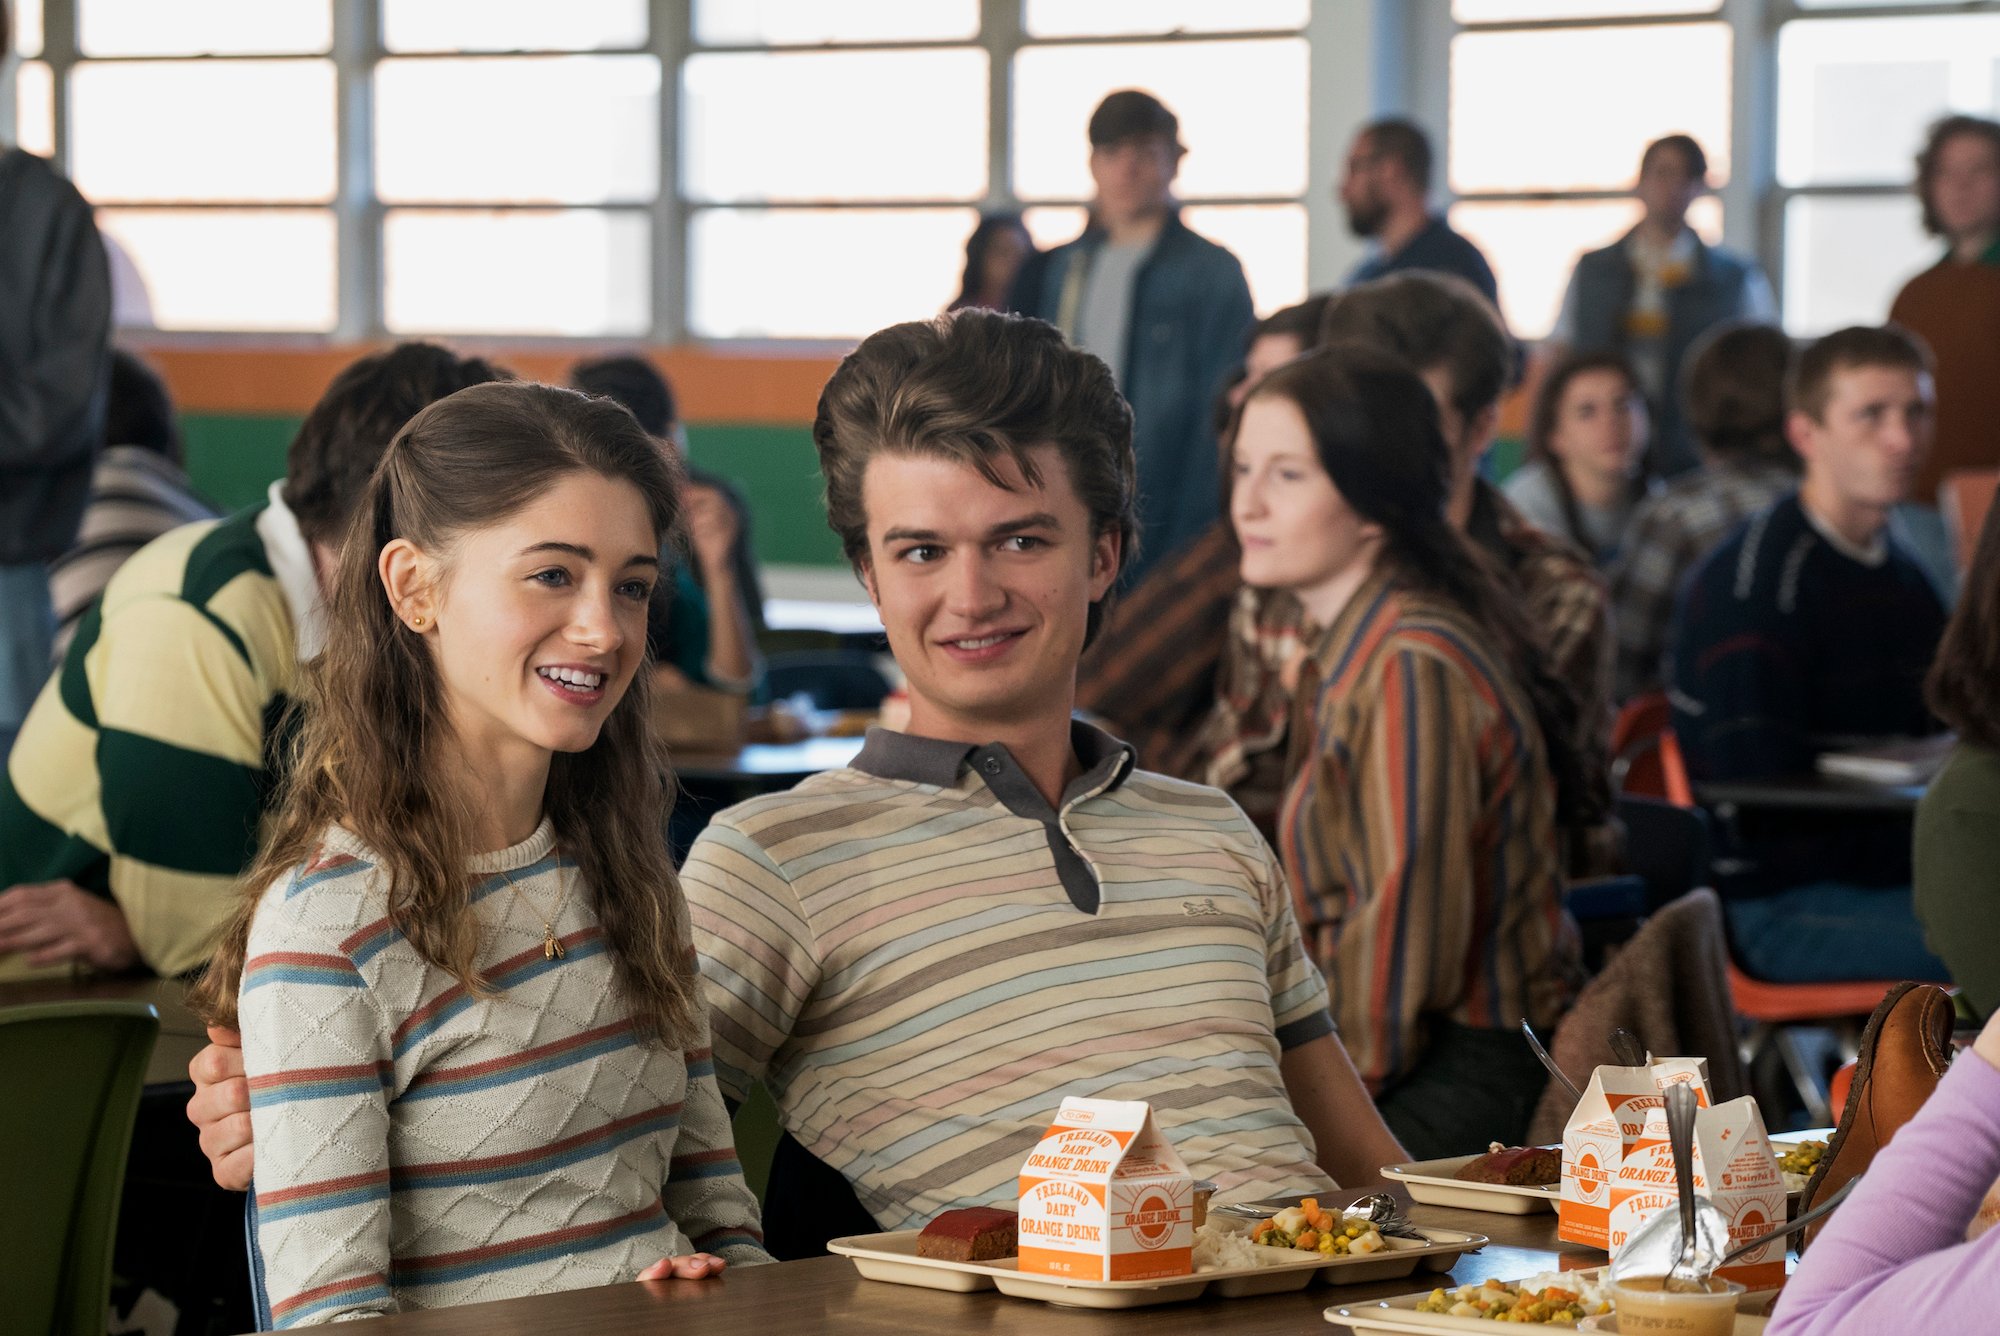 Nancy and Steve smile in the cafeteria at their high school in a production still from 'Stranger Things' Season 1.